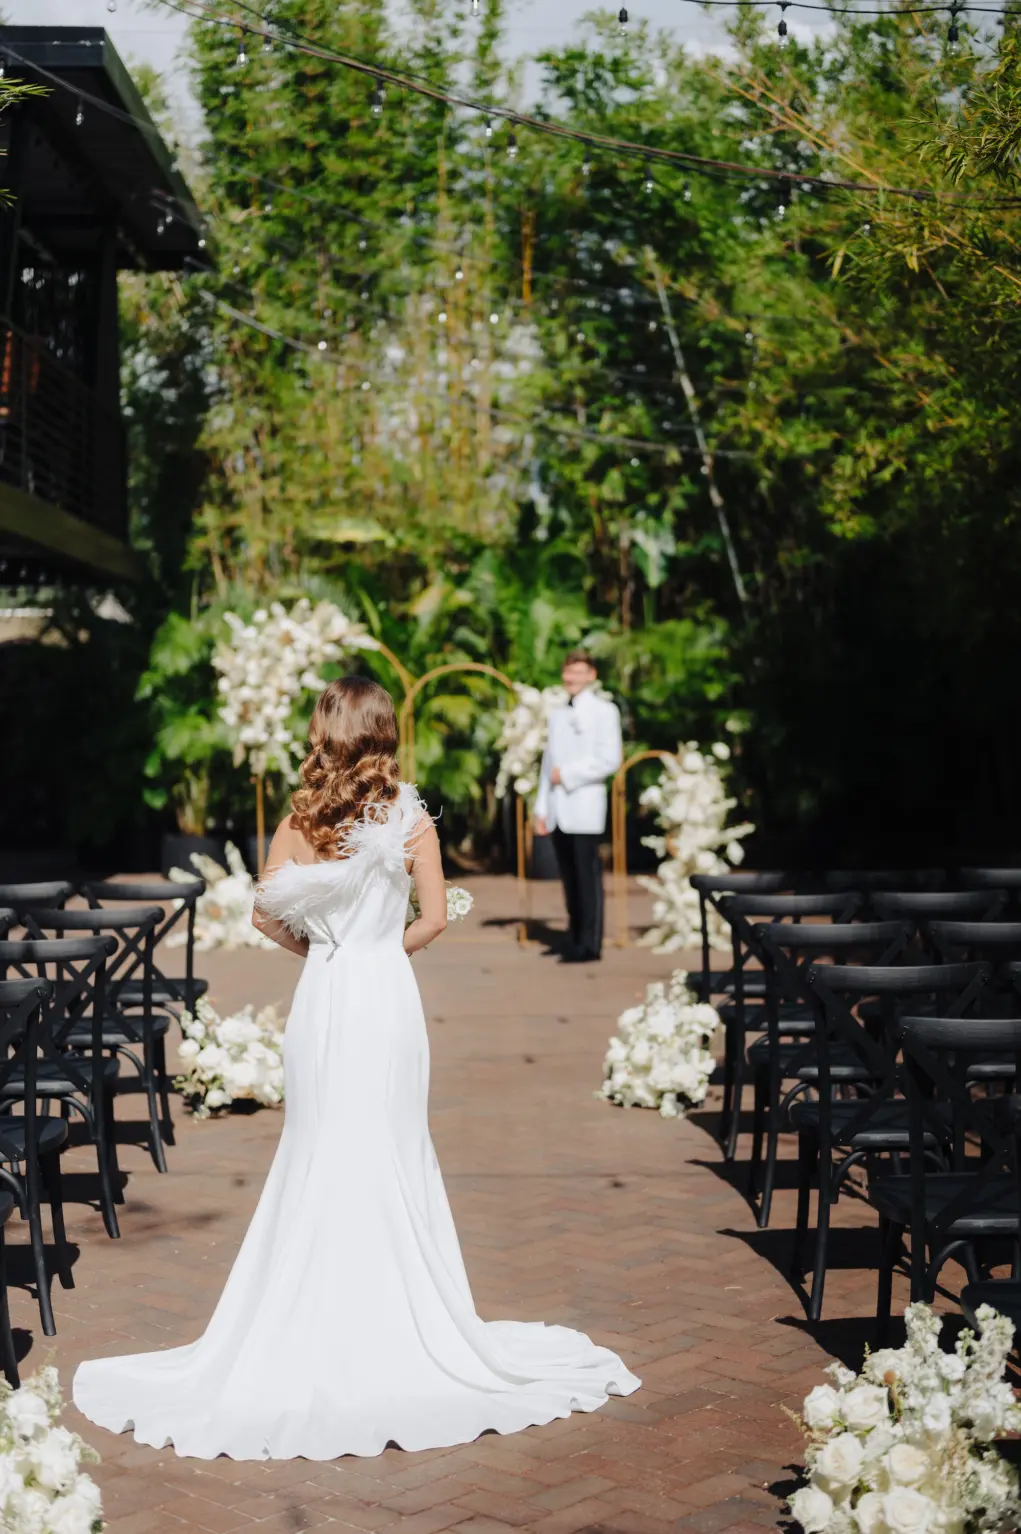 Modern Outdoor Courtyard Wedding Ideas with Black Chairs and White Ceremony Aisle Flowers | Downtown St Pete NOVA 535 Wedding Venue | Florist Marigold Flower Co | Photographer Mcneile Photography | Videographer Sabrina Autumn Photography | Planner Kelci Leigh Events